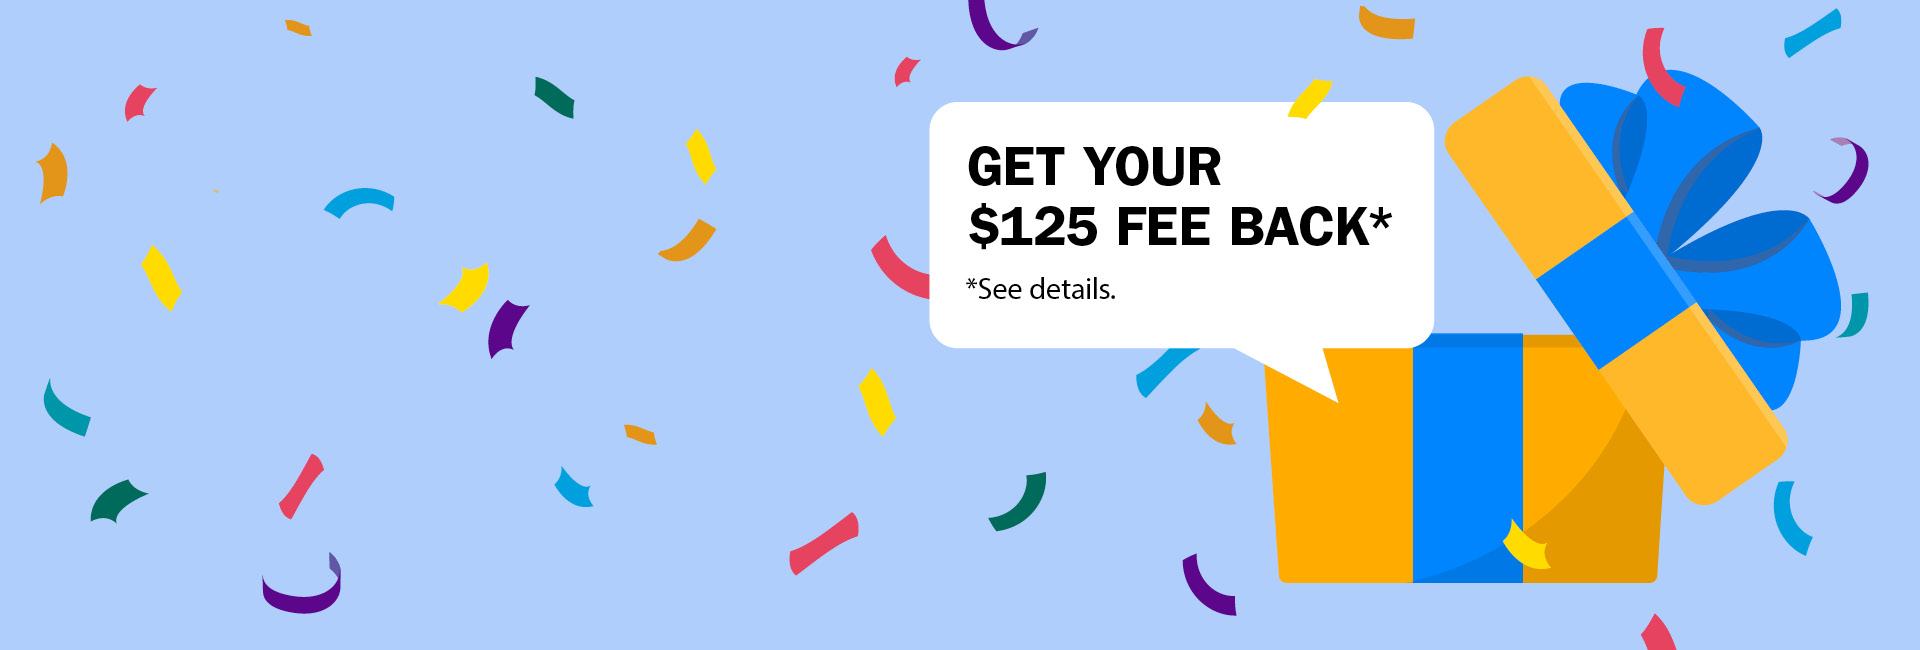 Get your $125 fee back